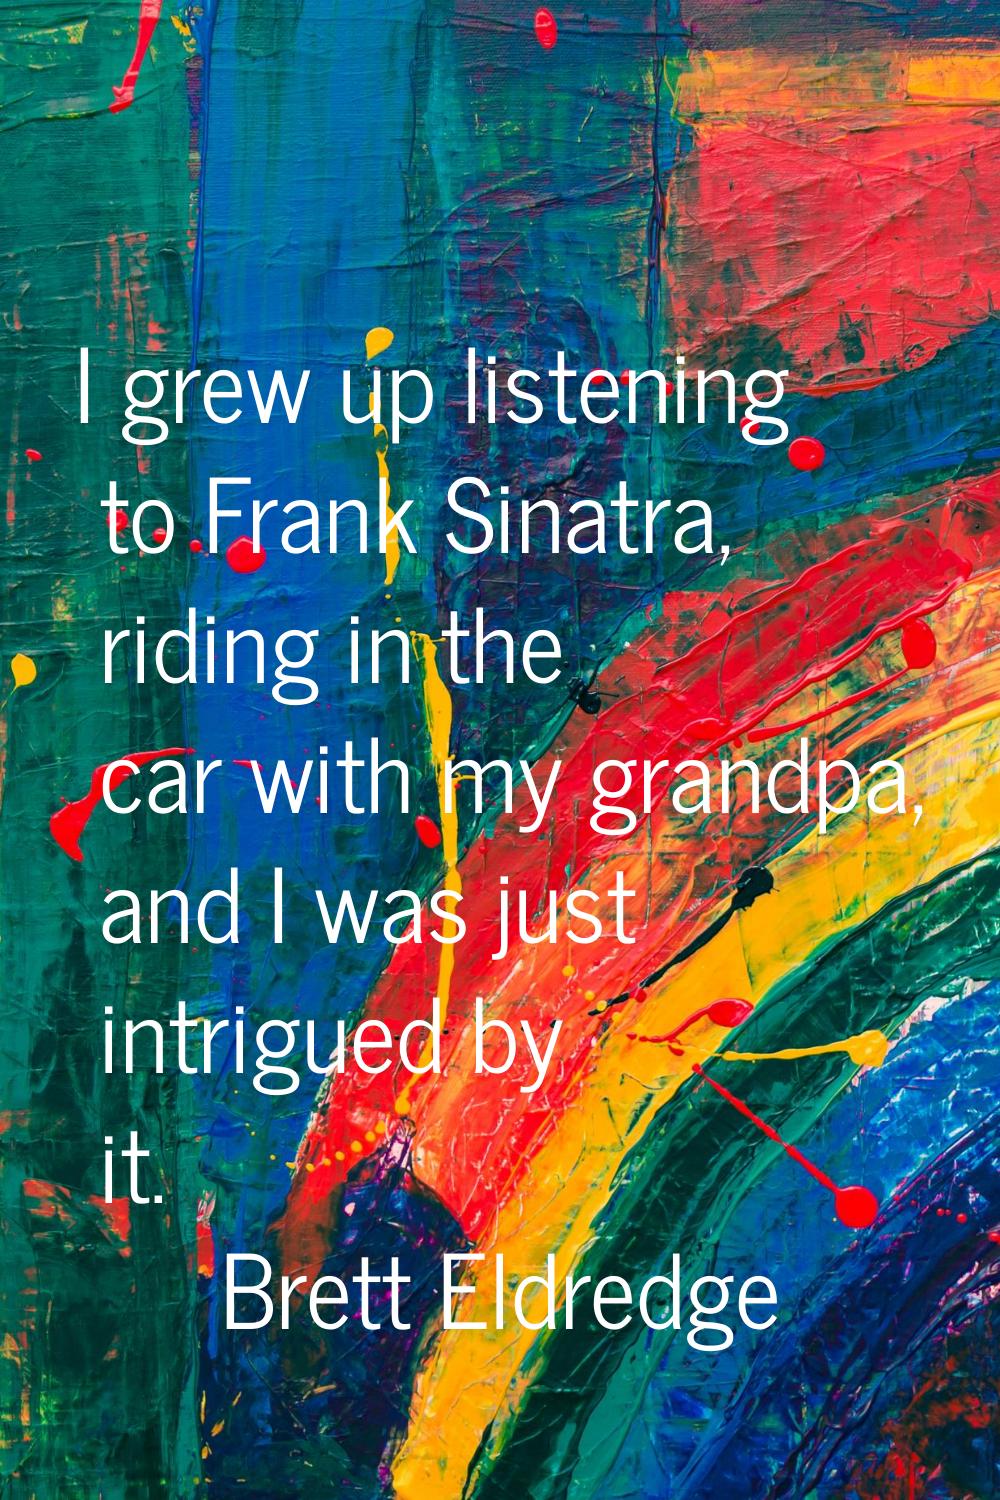 I grew up listening to Frank Sinatra, riding in the car with my grandpa, and I was just intrigued b